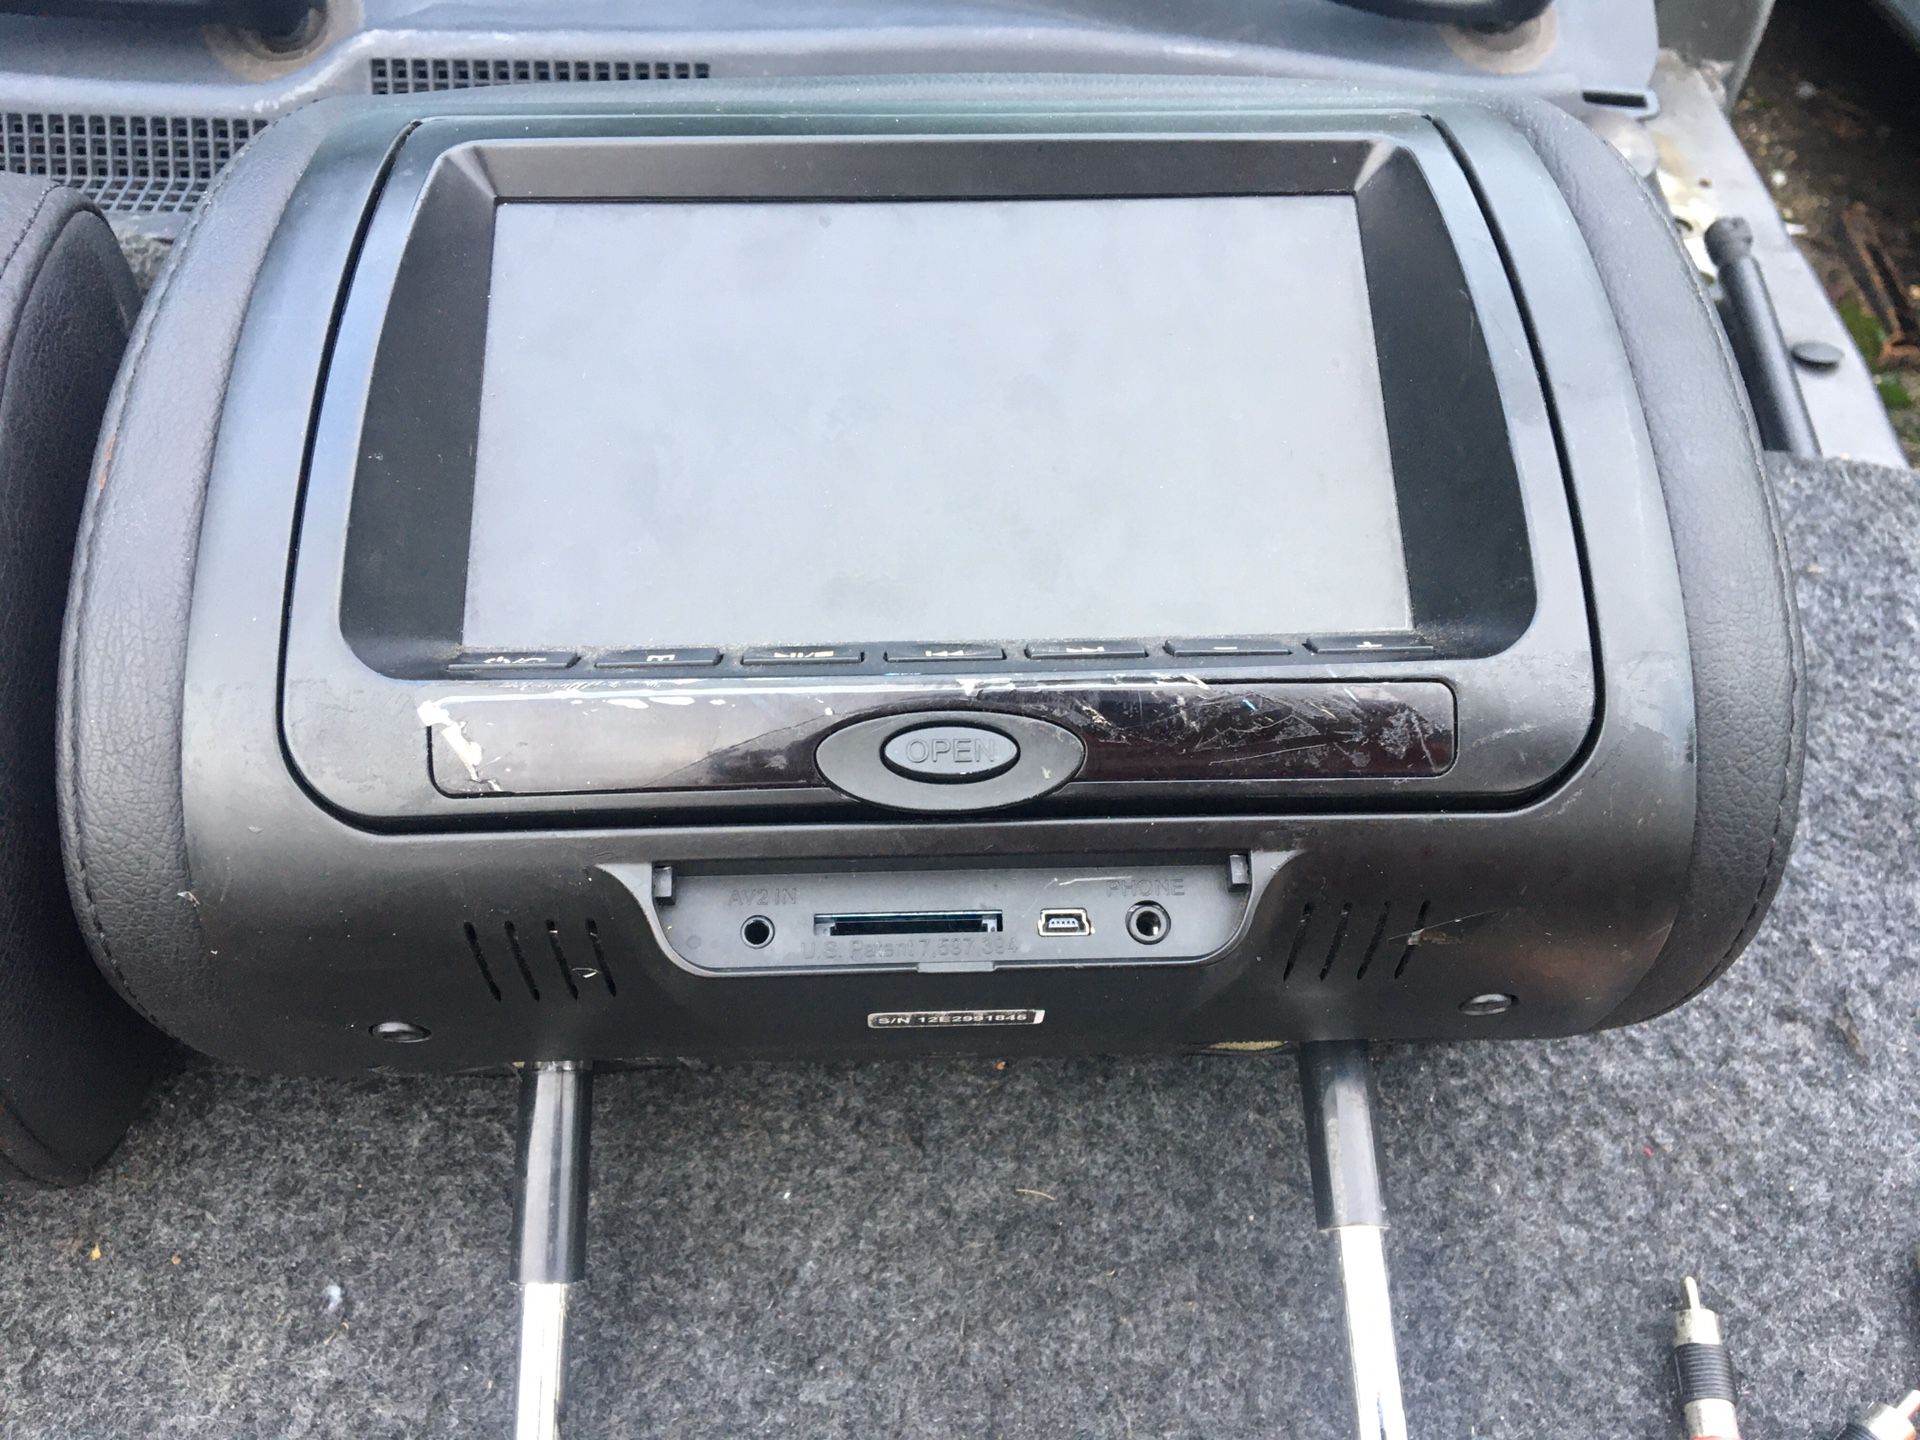 Chameleon CLD 700x 2 x monitors DVD players to your car